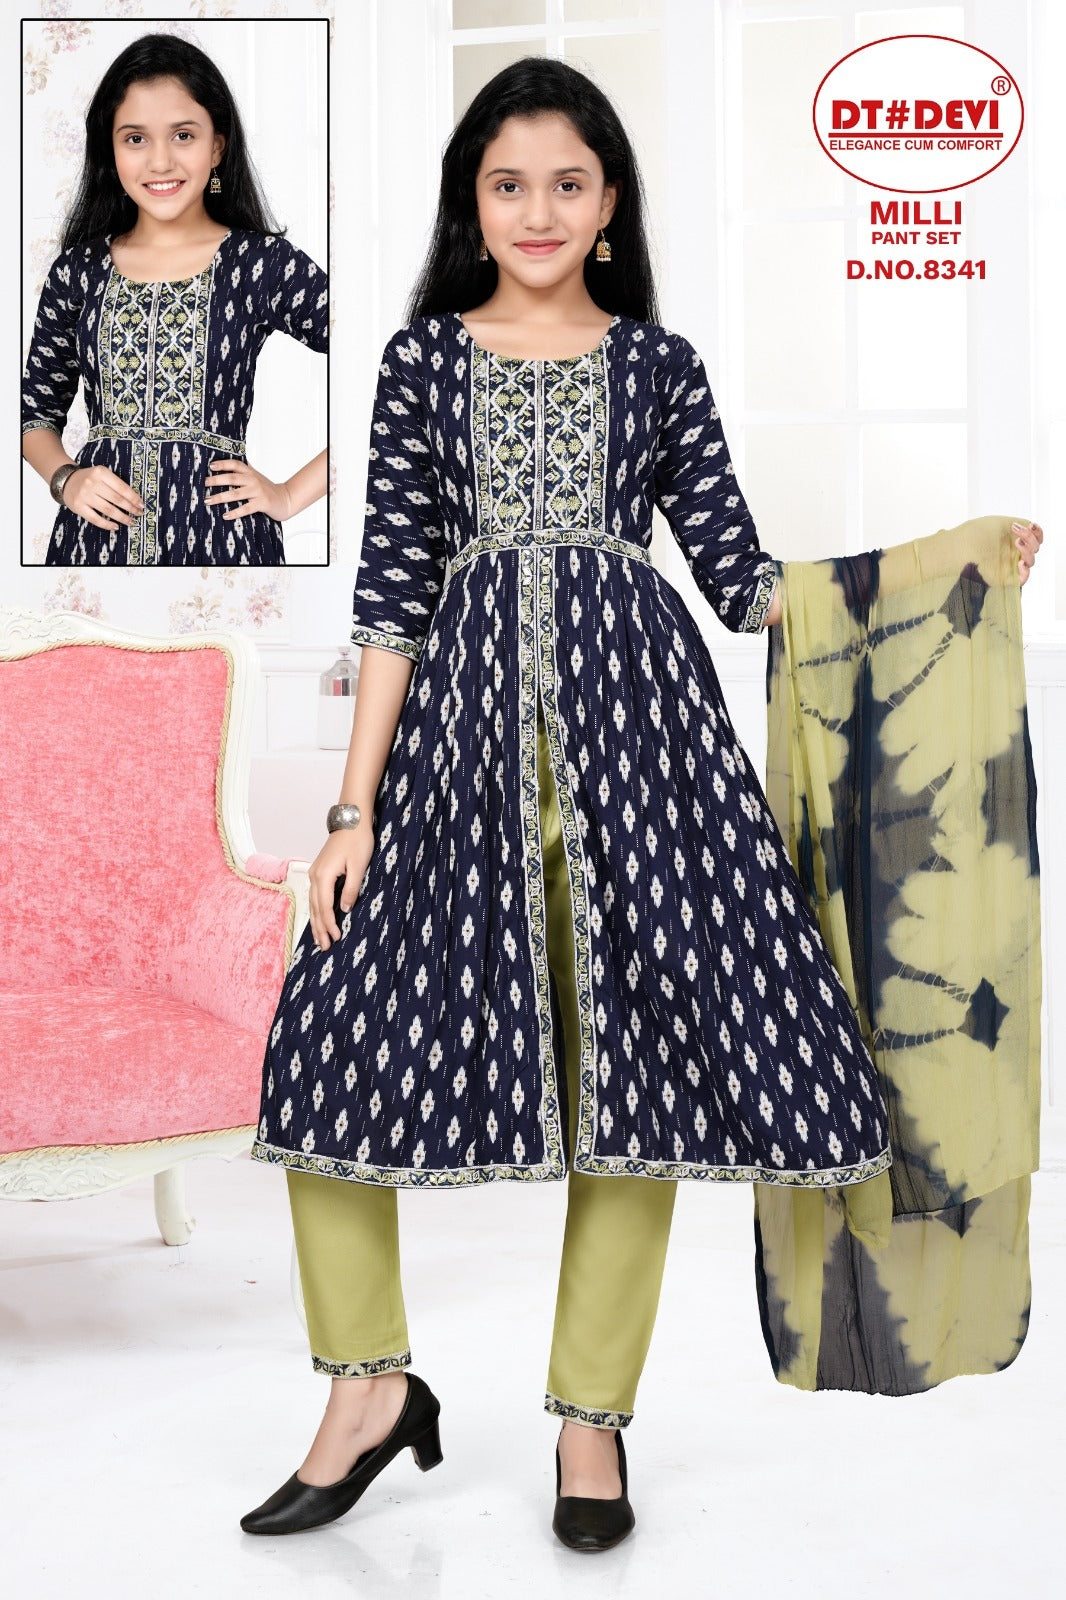 Milli-8341 Dt Devi Rayon Girls Readymade Pant Suits